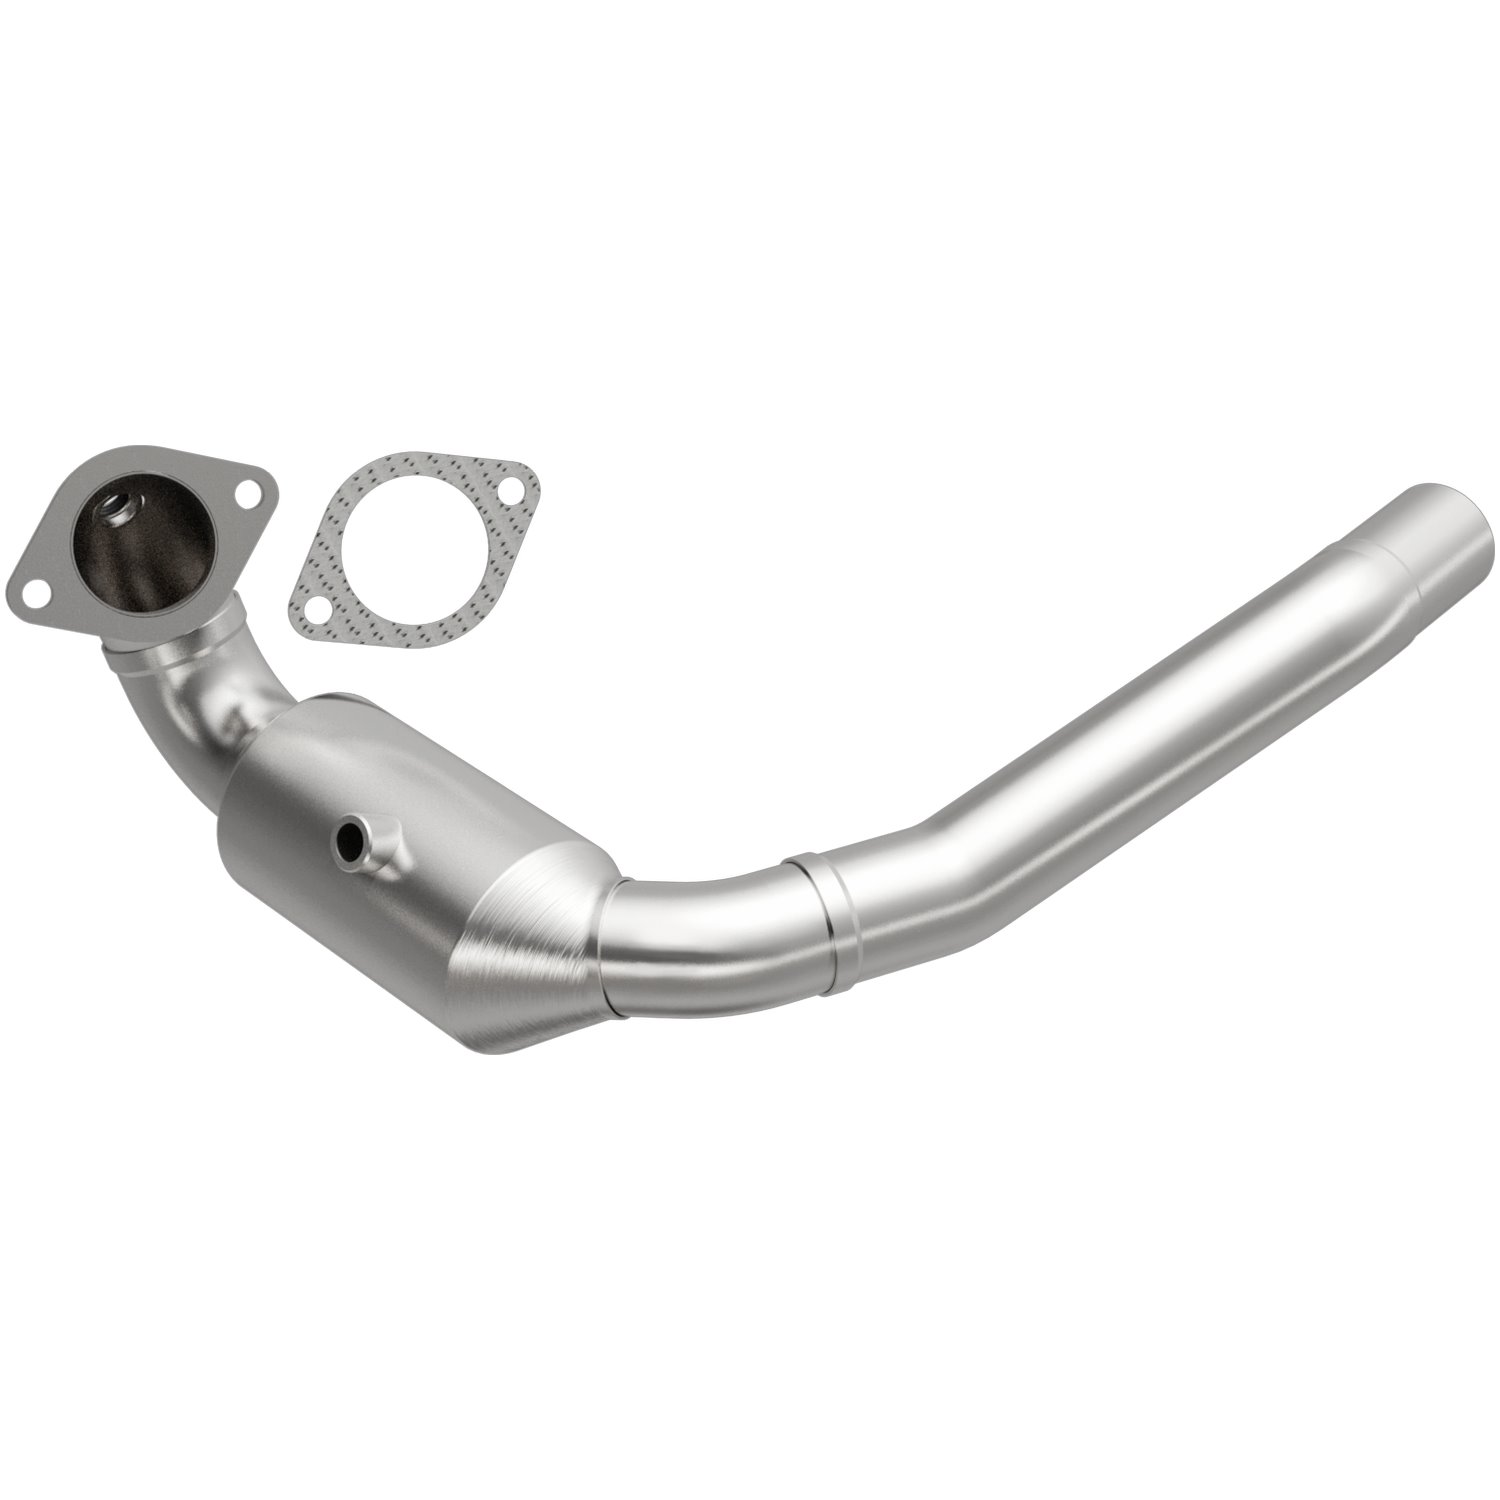 OEM Grade Federal / EPA Compliant Direct-Fit Catalytic Converter 21-603